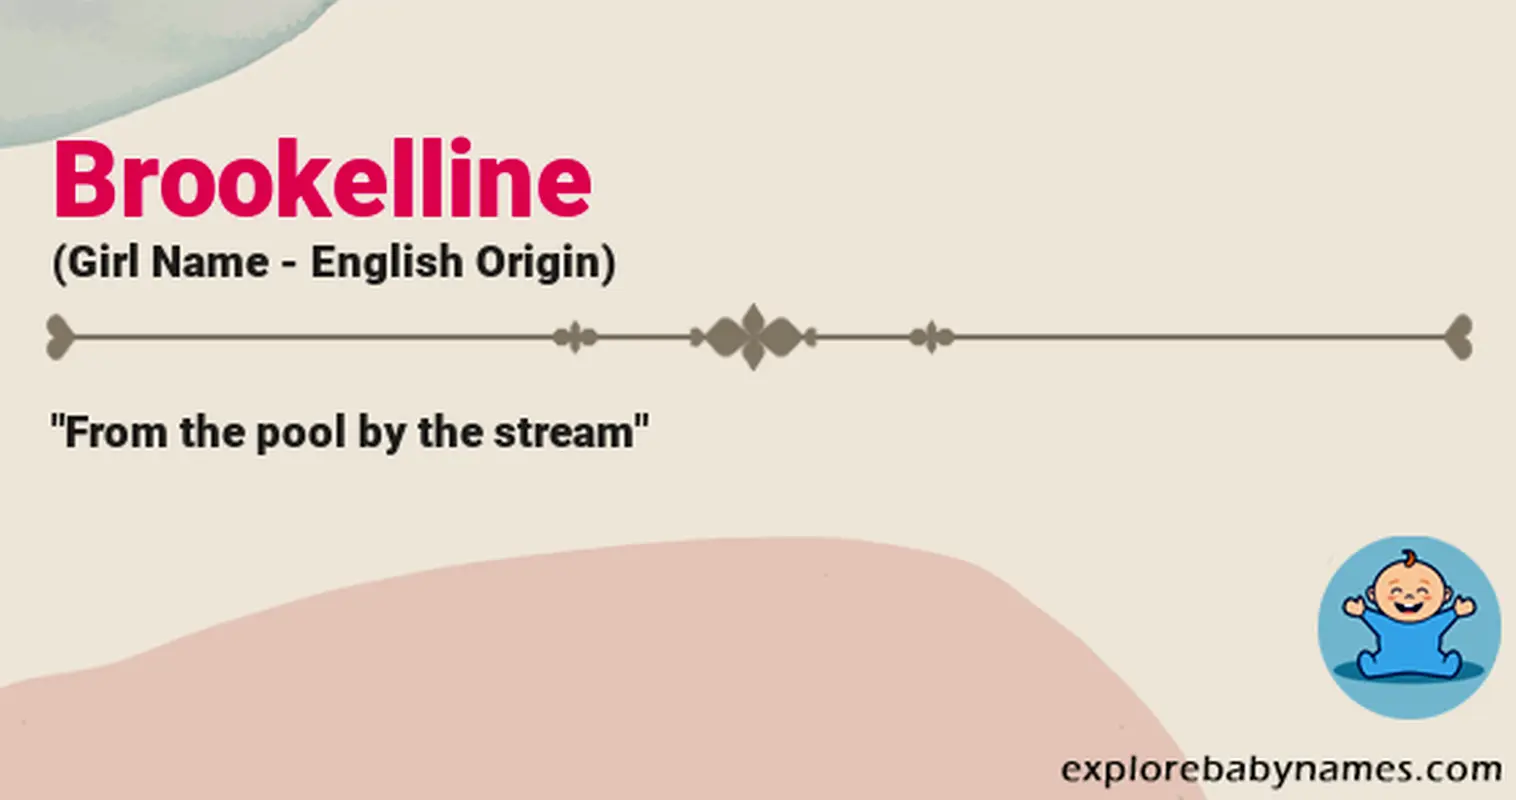 Meaning of Brookelline